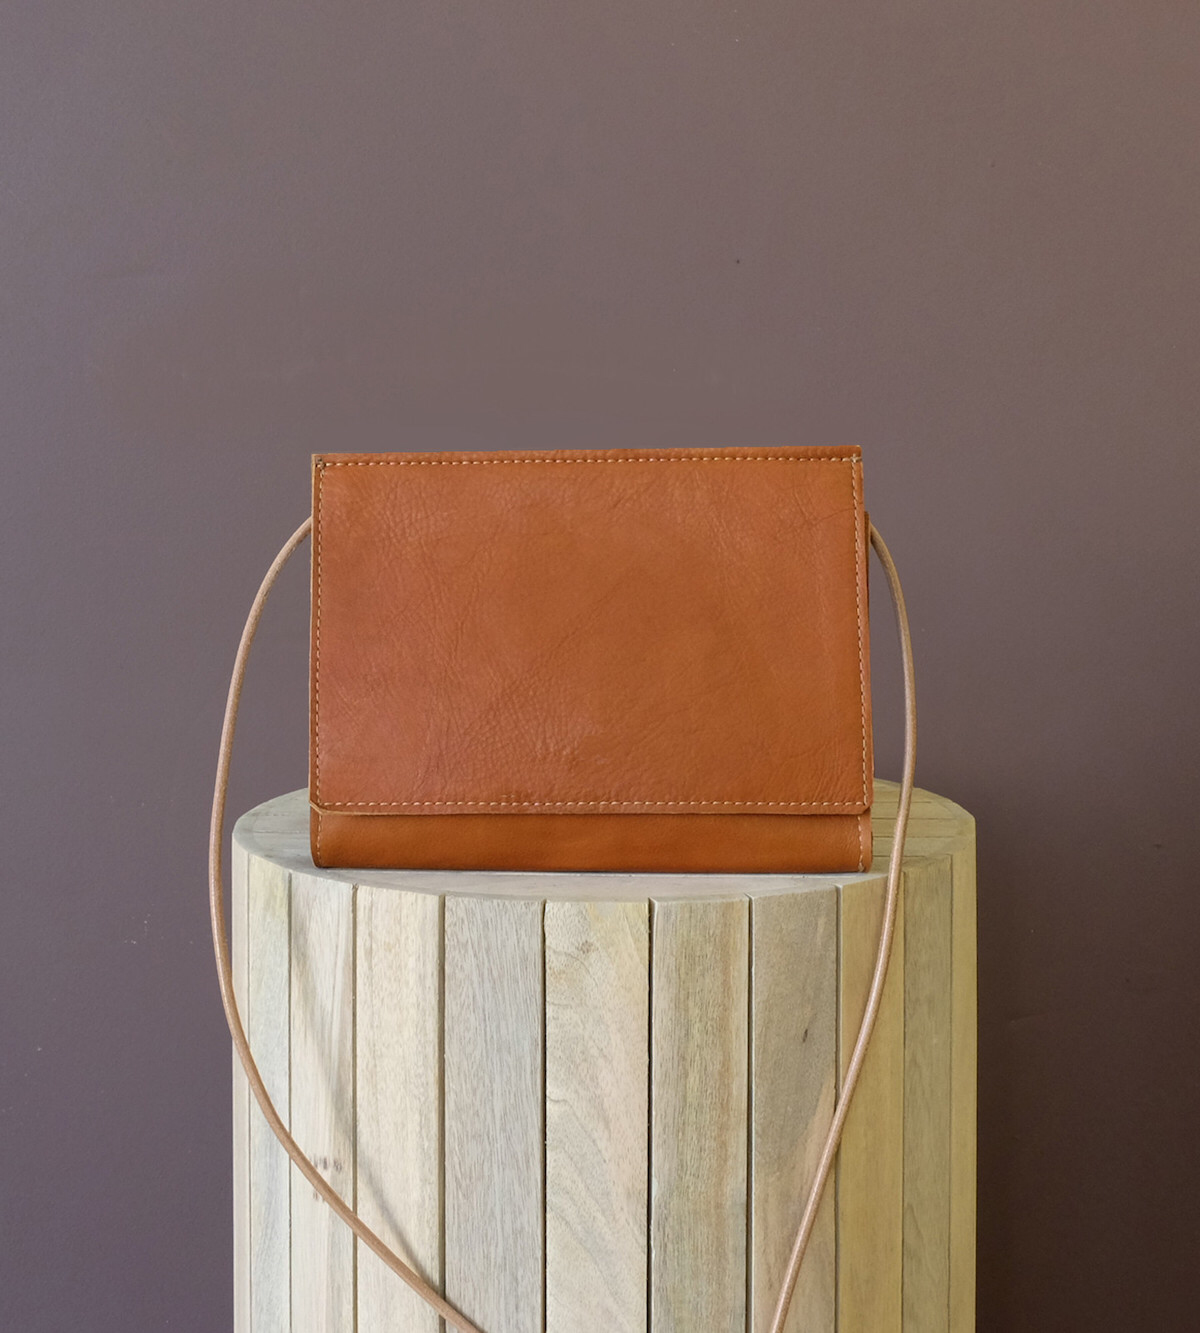 Adelaide Crossbody in Caramel Tan Leather and Suede -- $168